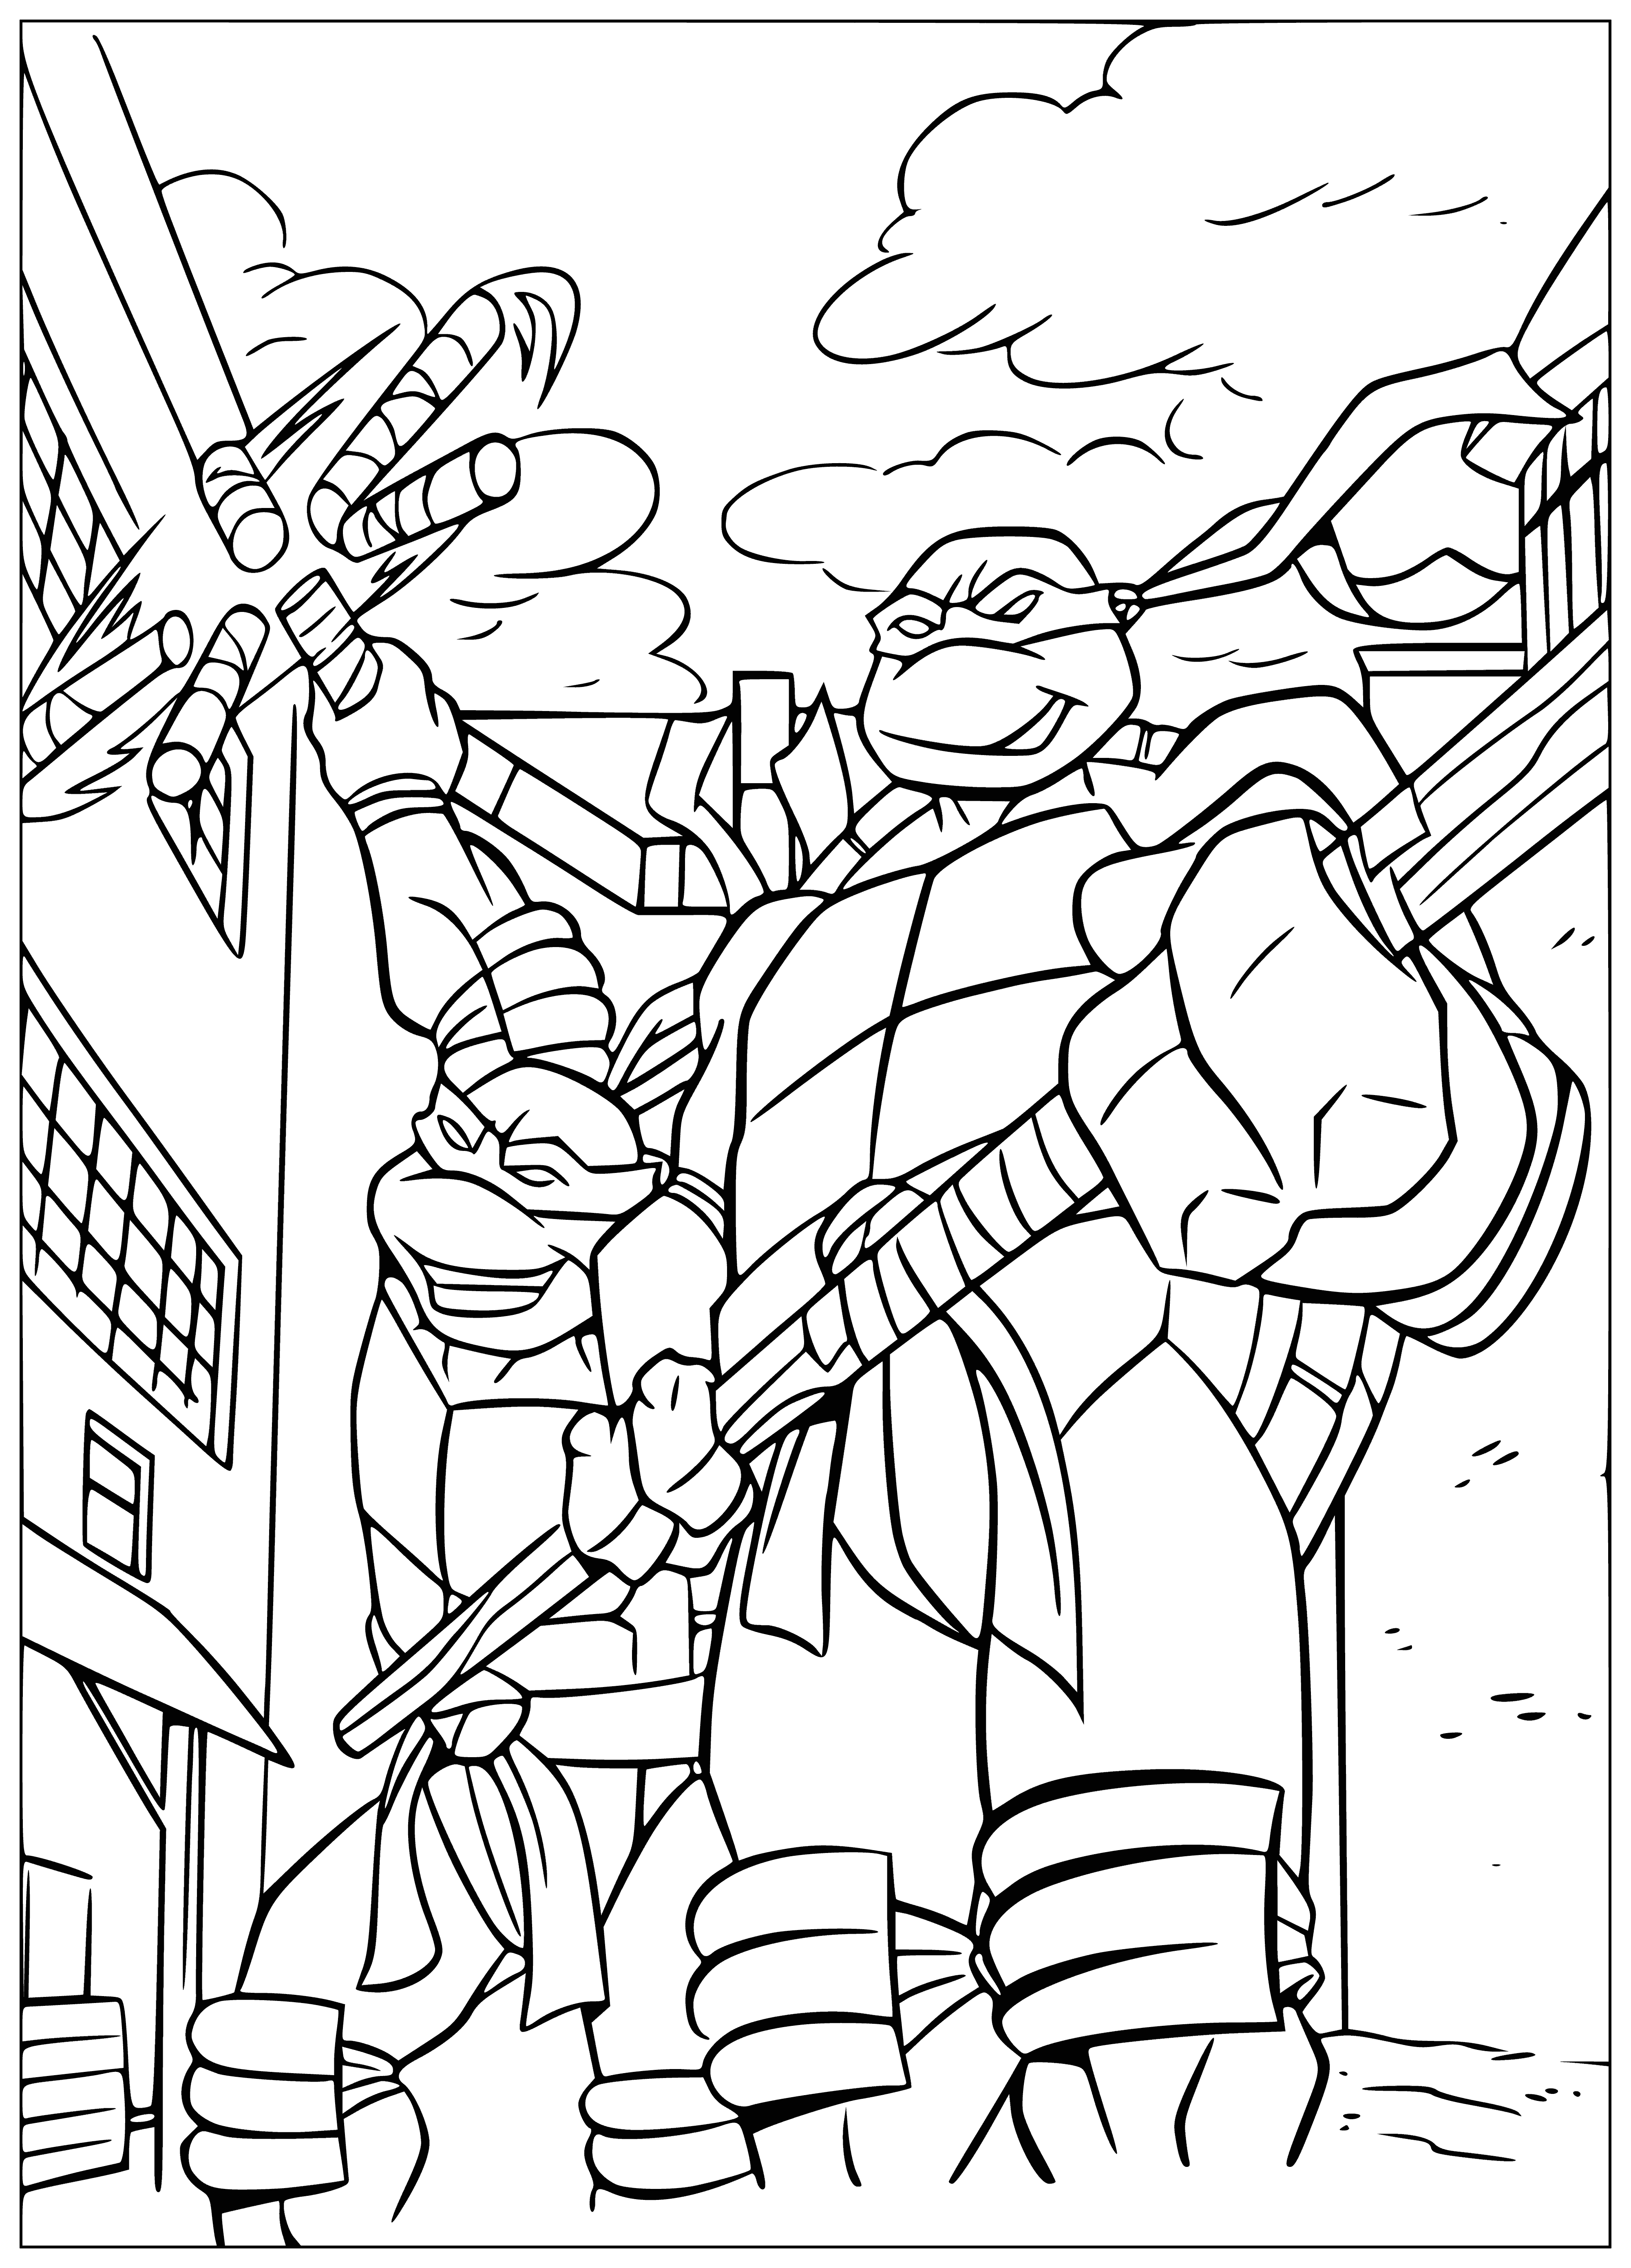 coloring page: Two Ninja Turtles in a coloring page, Donatello (purple) and Michelangelo (orange) with nunchucks, arms crossed.